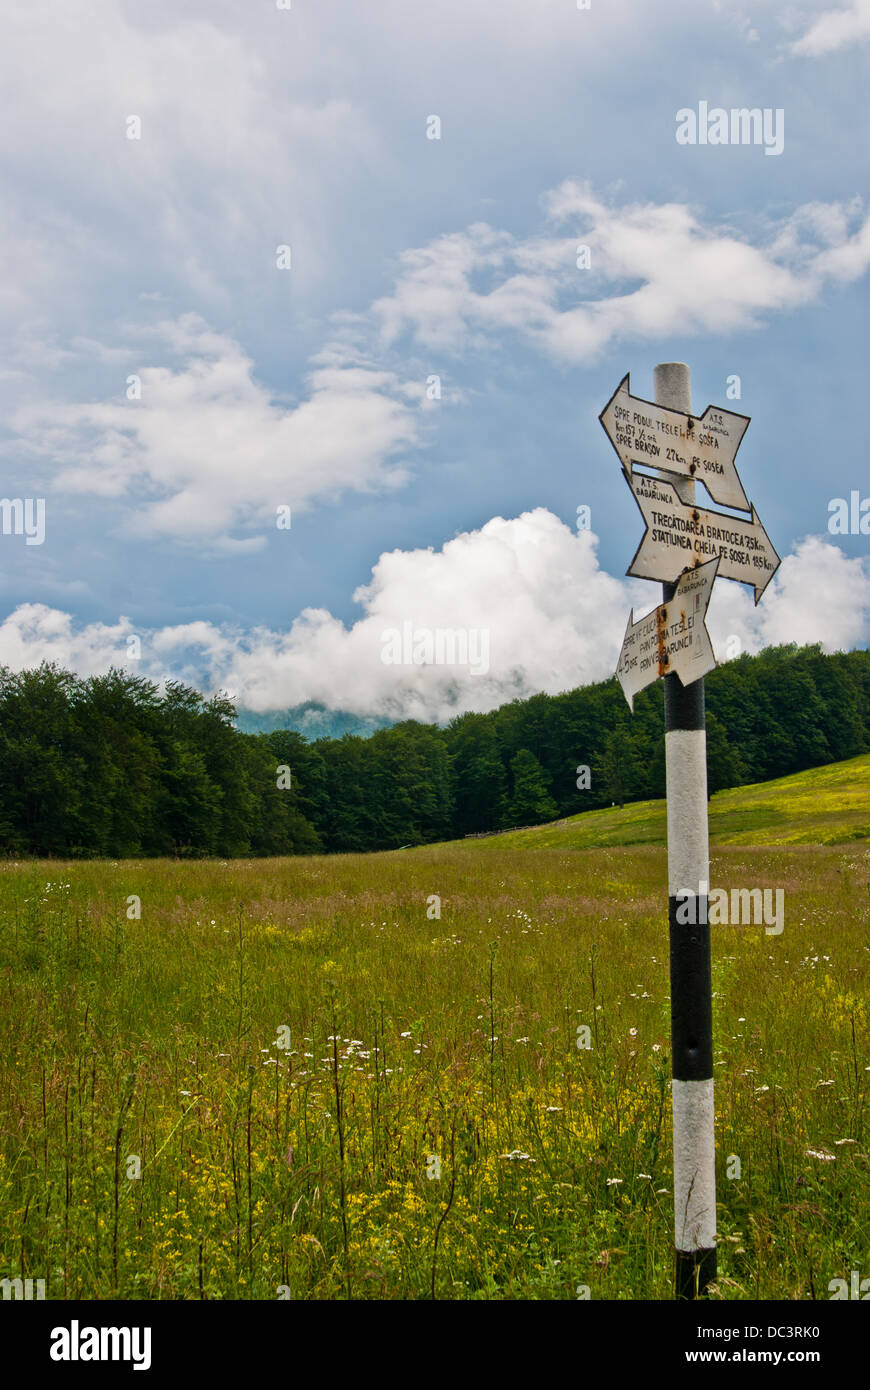 Directional sighn in the nature, made to help tourist in finding the right way for they destination. Stock Photo